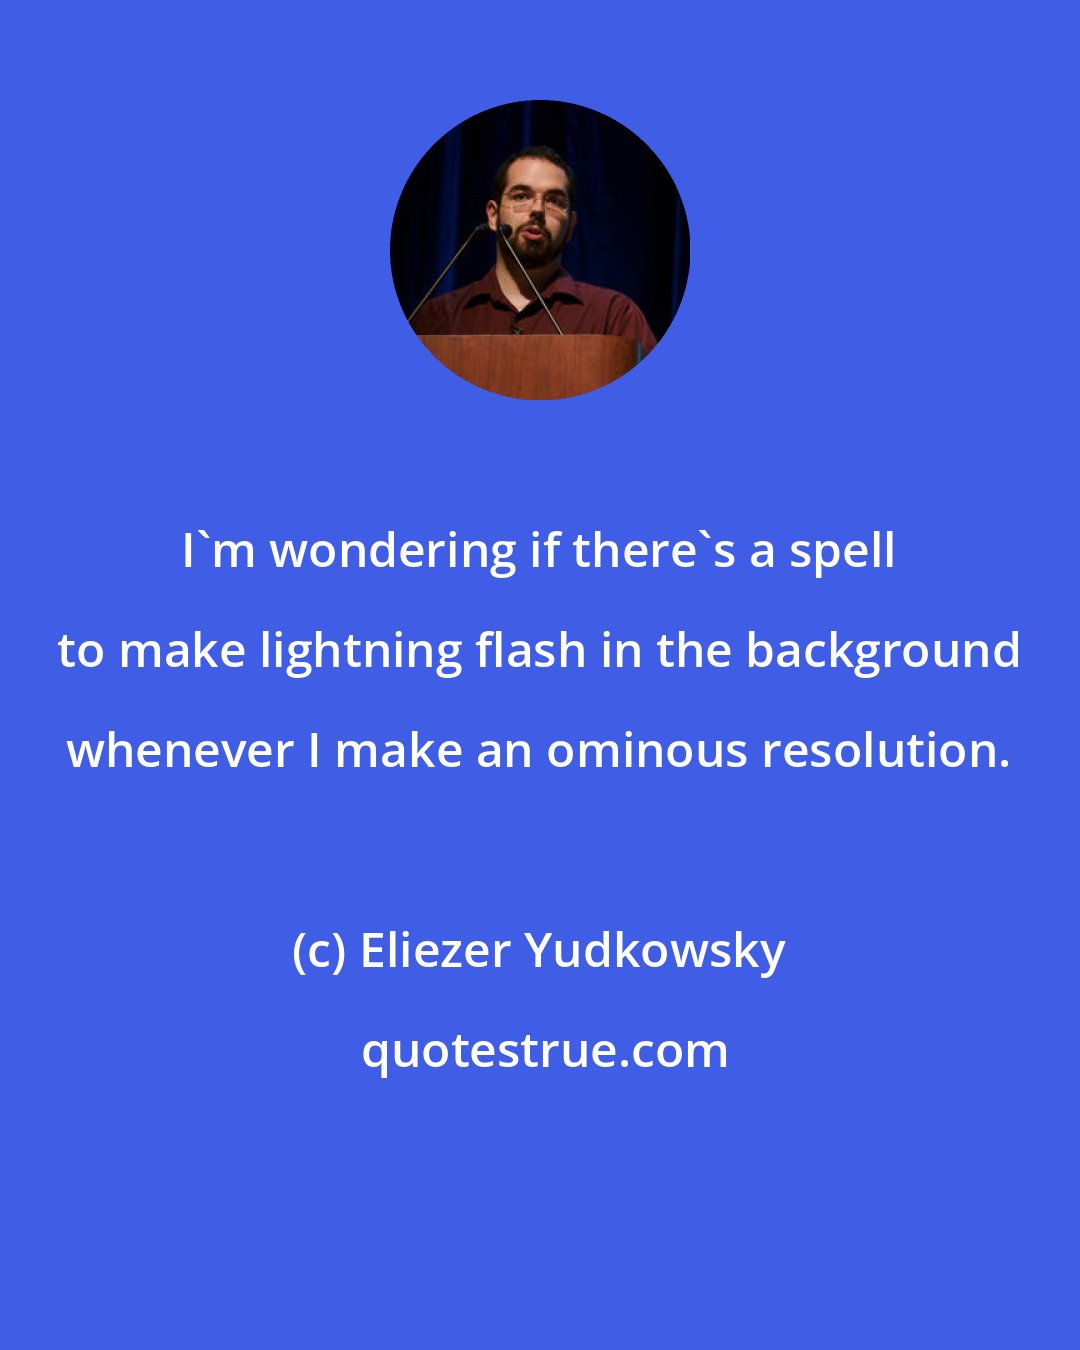 Eliezer Yudkowsky: I'm wondering if there's a spell to make lightning flash in the background whenever I make an ominous resolution.